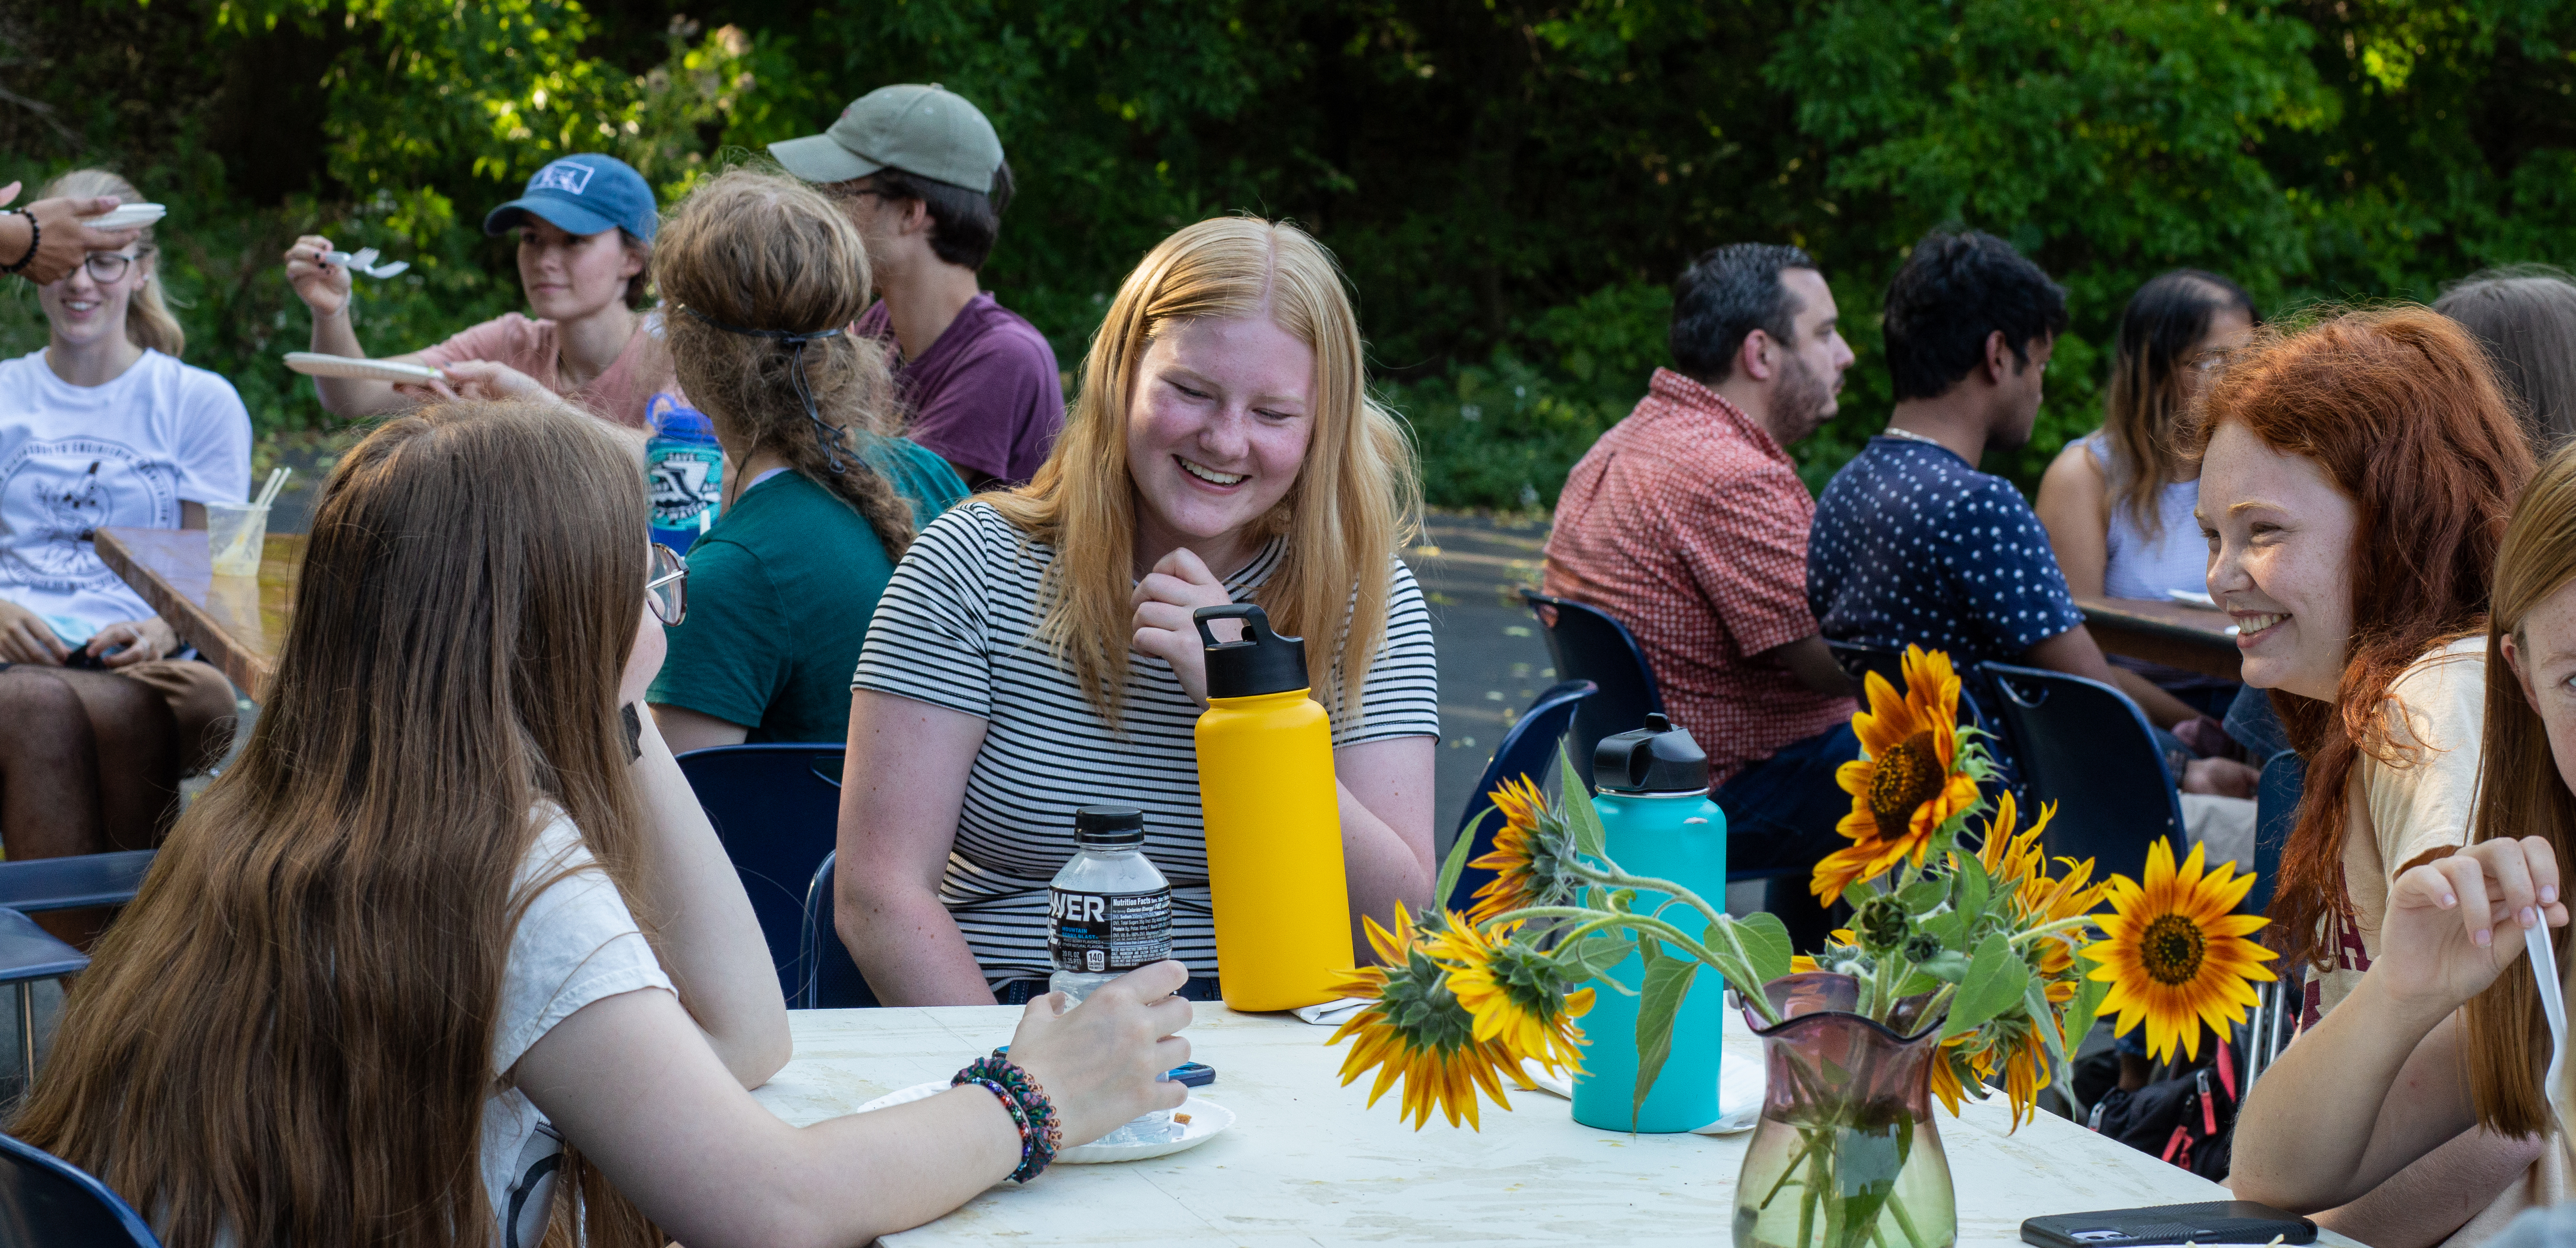 Students gather at table at the annual BBE BBQ and are seen sharing a laugh